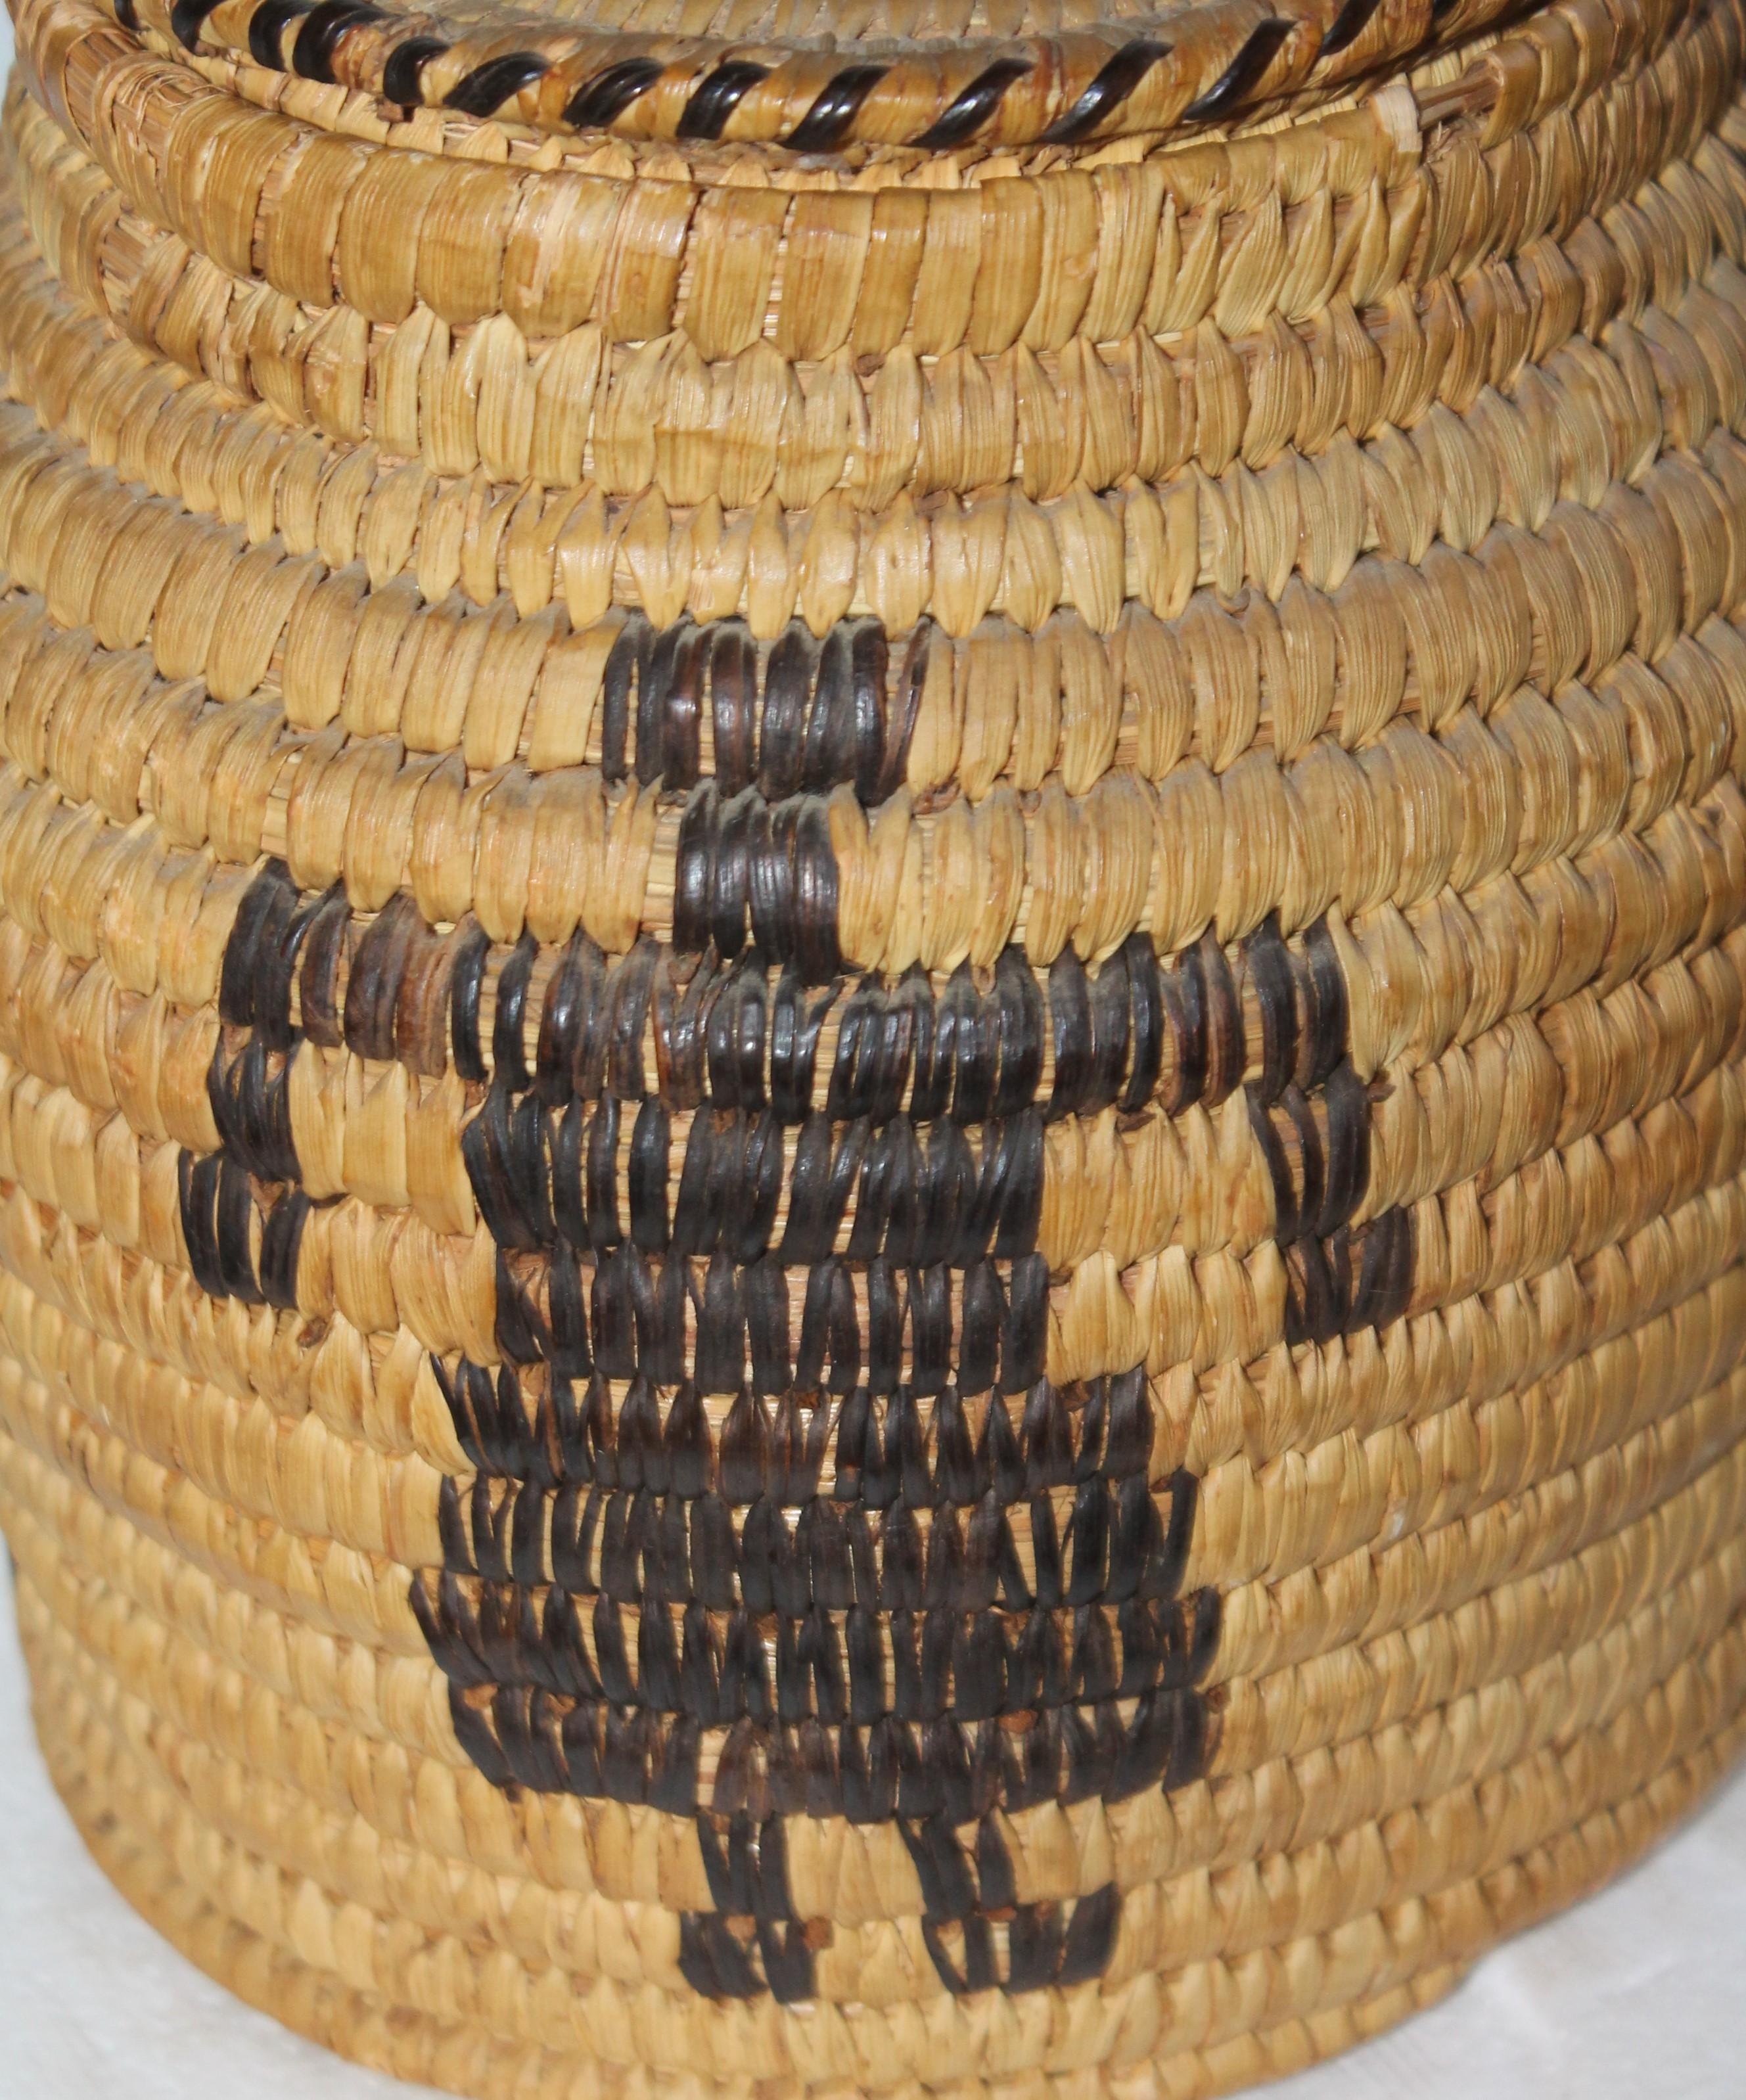 Hand-Crafted Papago Indian Pictorial Lidded Basket